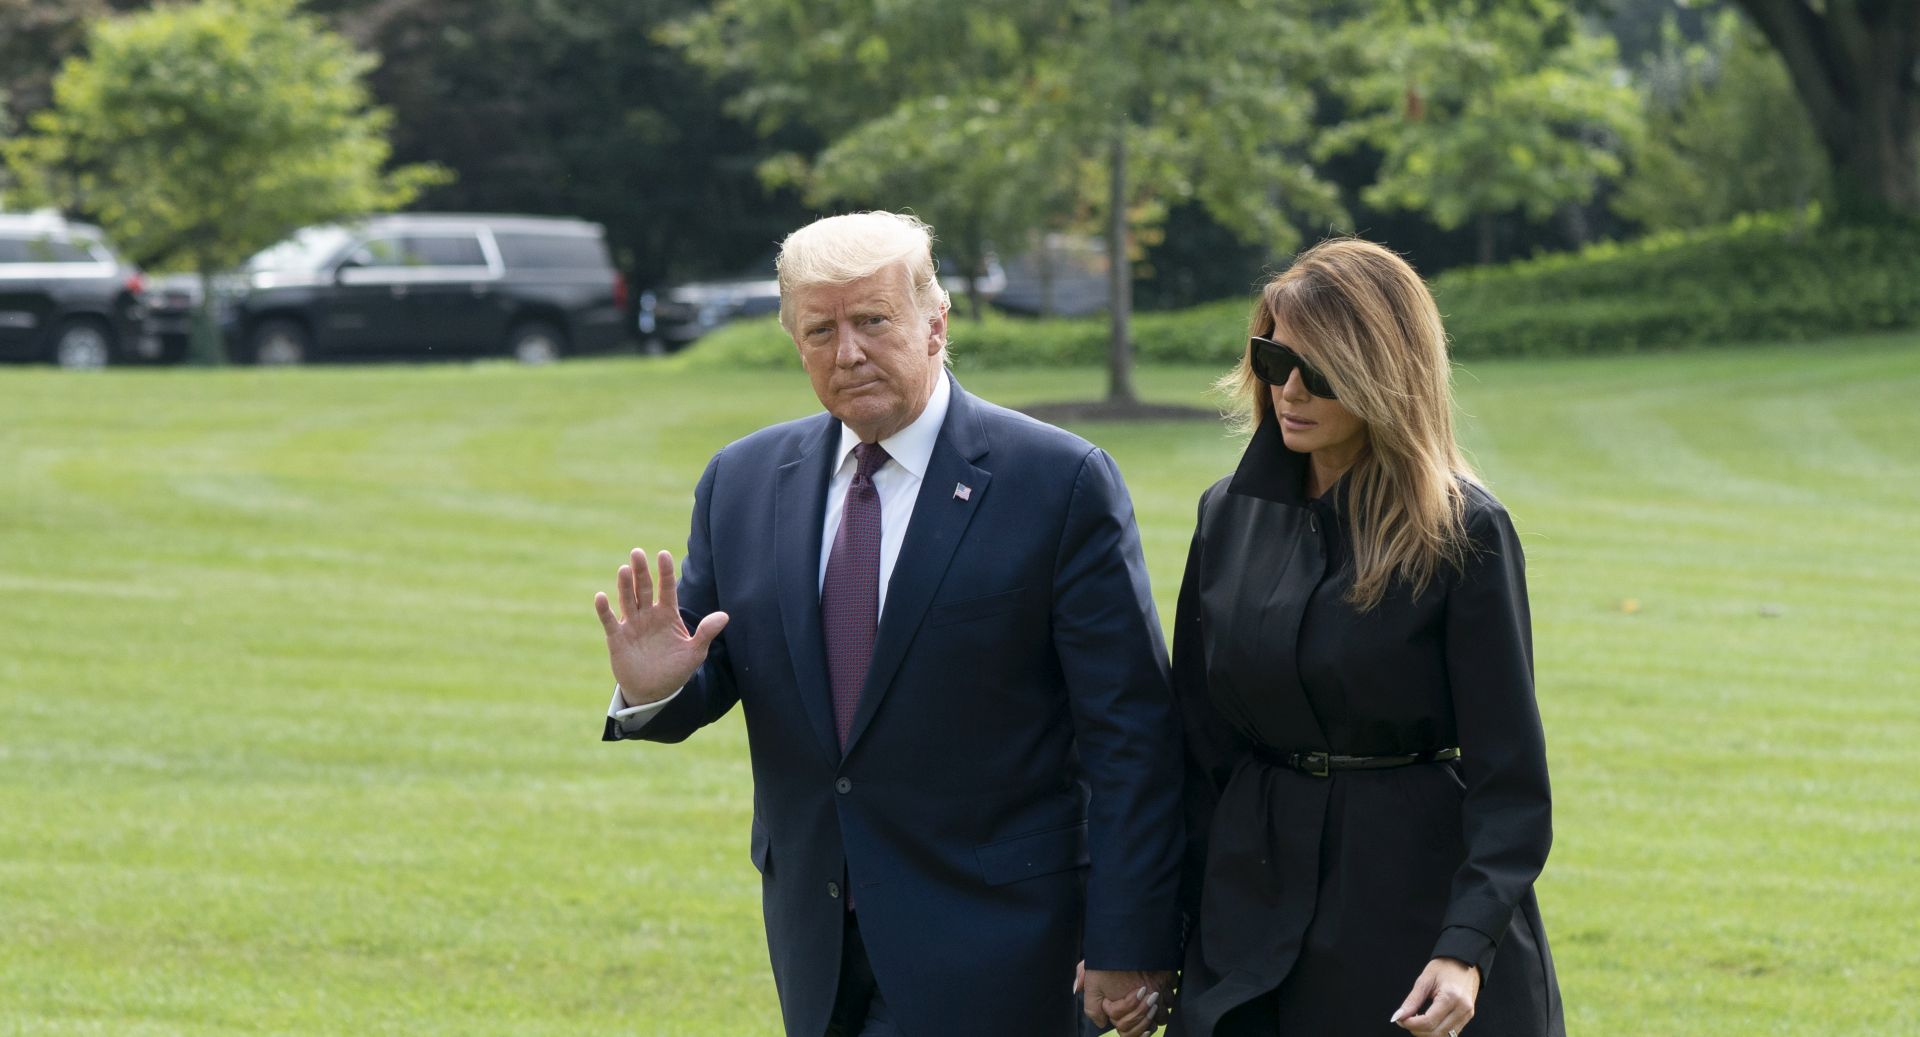 epa08662088 US President Donald J. Trump (L) and First lady Melania Trump (R) return to the White House, in Washington, DC, USA, on 11 September 2020, after attending a Flight 93 National Memorial 19th Anniversary of the 9/11 terrorist attack Observance in Shanksville, Pennsylvania.  EPA/Chris Kleponis / POOL